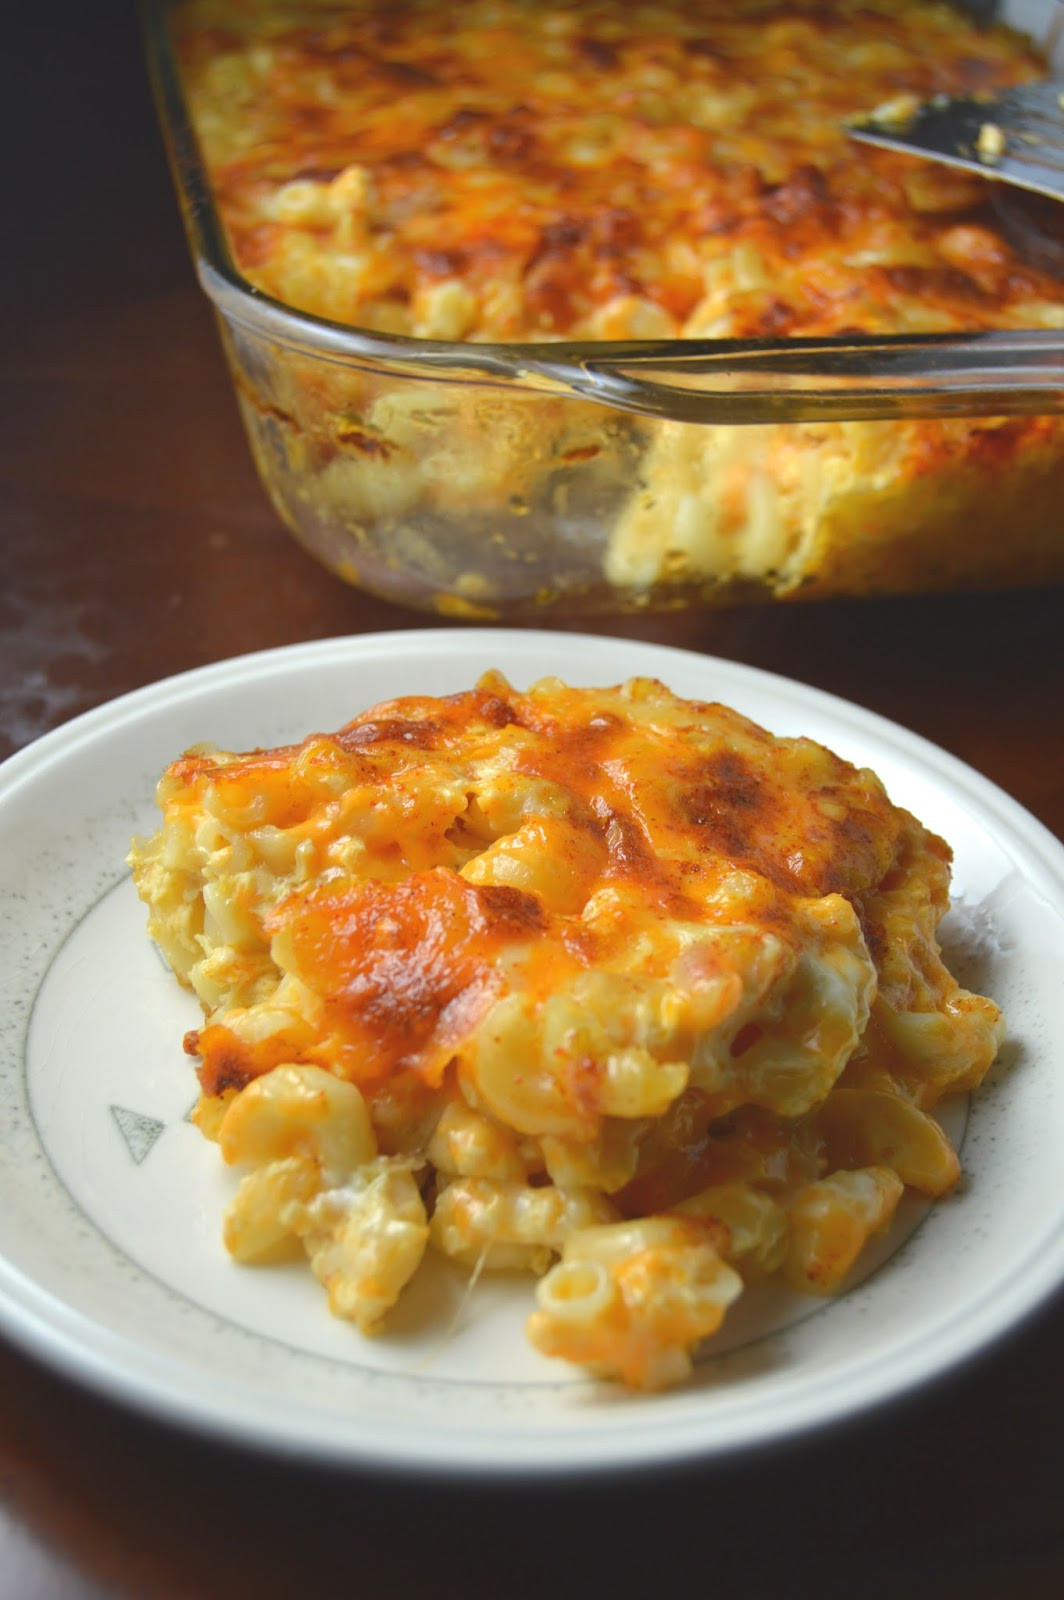 Best Macaroni And Cheese Recipe Baked
 Baked Macaroni and Cheese